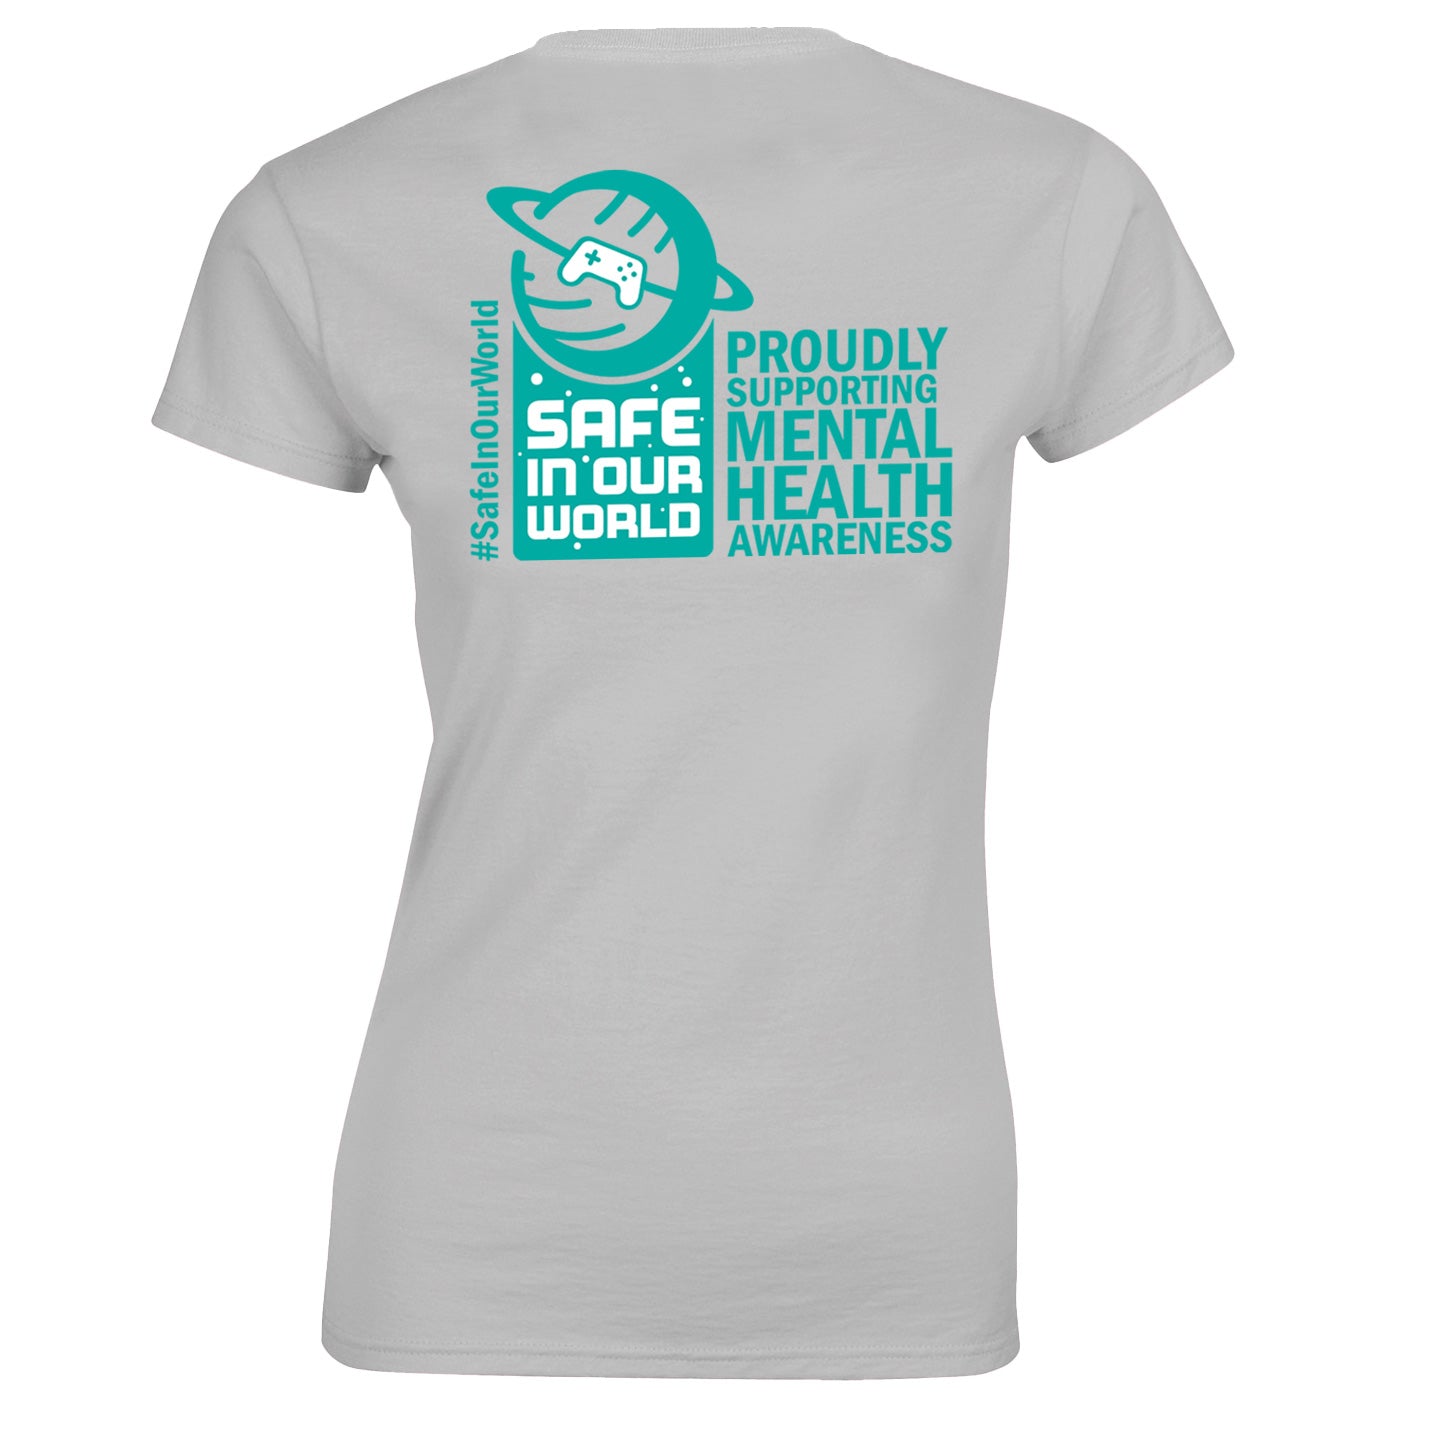 SIOW Official Charity T-Shirt GREY/GREEN Ladies Cut T-Shirt Seven Squared 